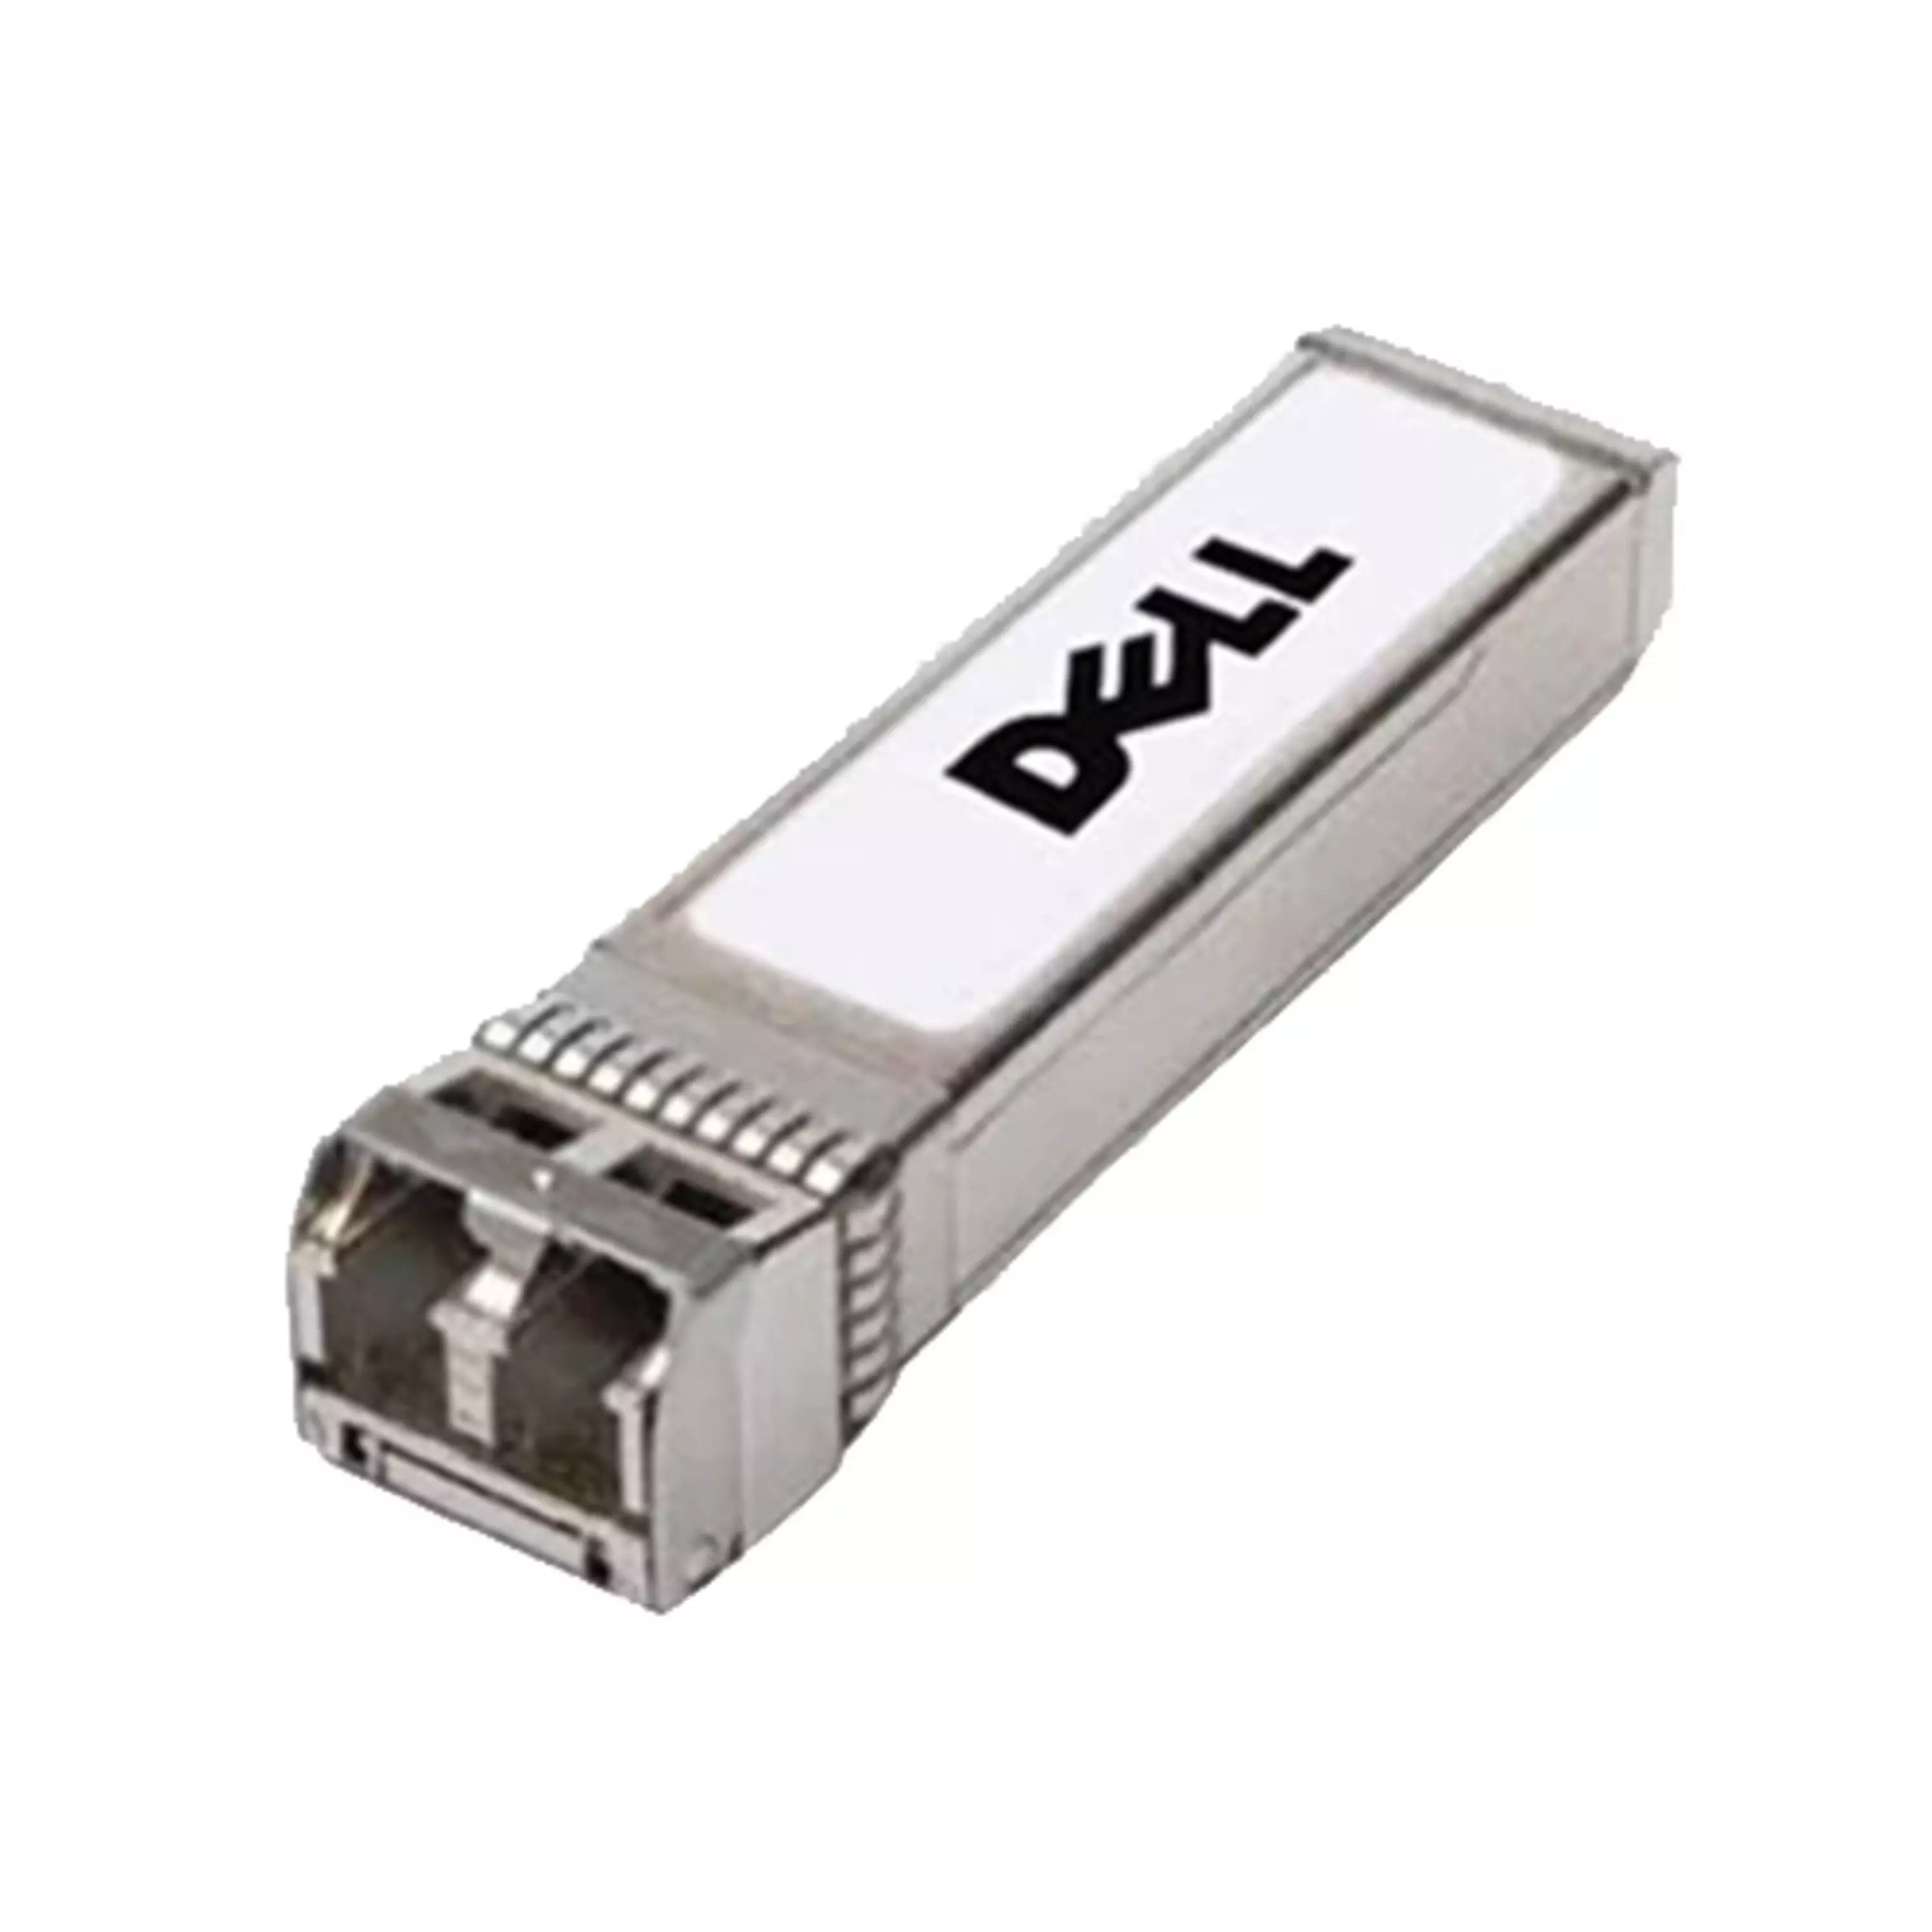 Dell Networking, Transceiver, SFP+, 10GbE, SR, 850nm Wavelength, 300m Reach,  12-Pack Dell USA